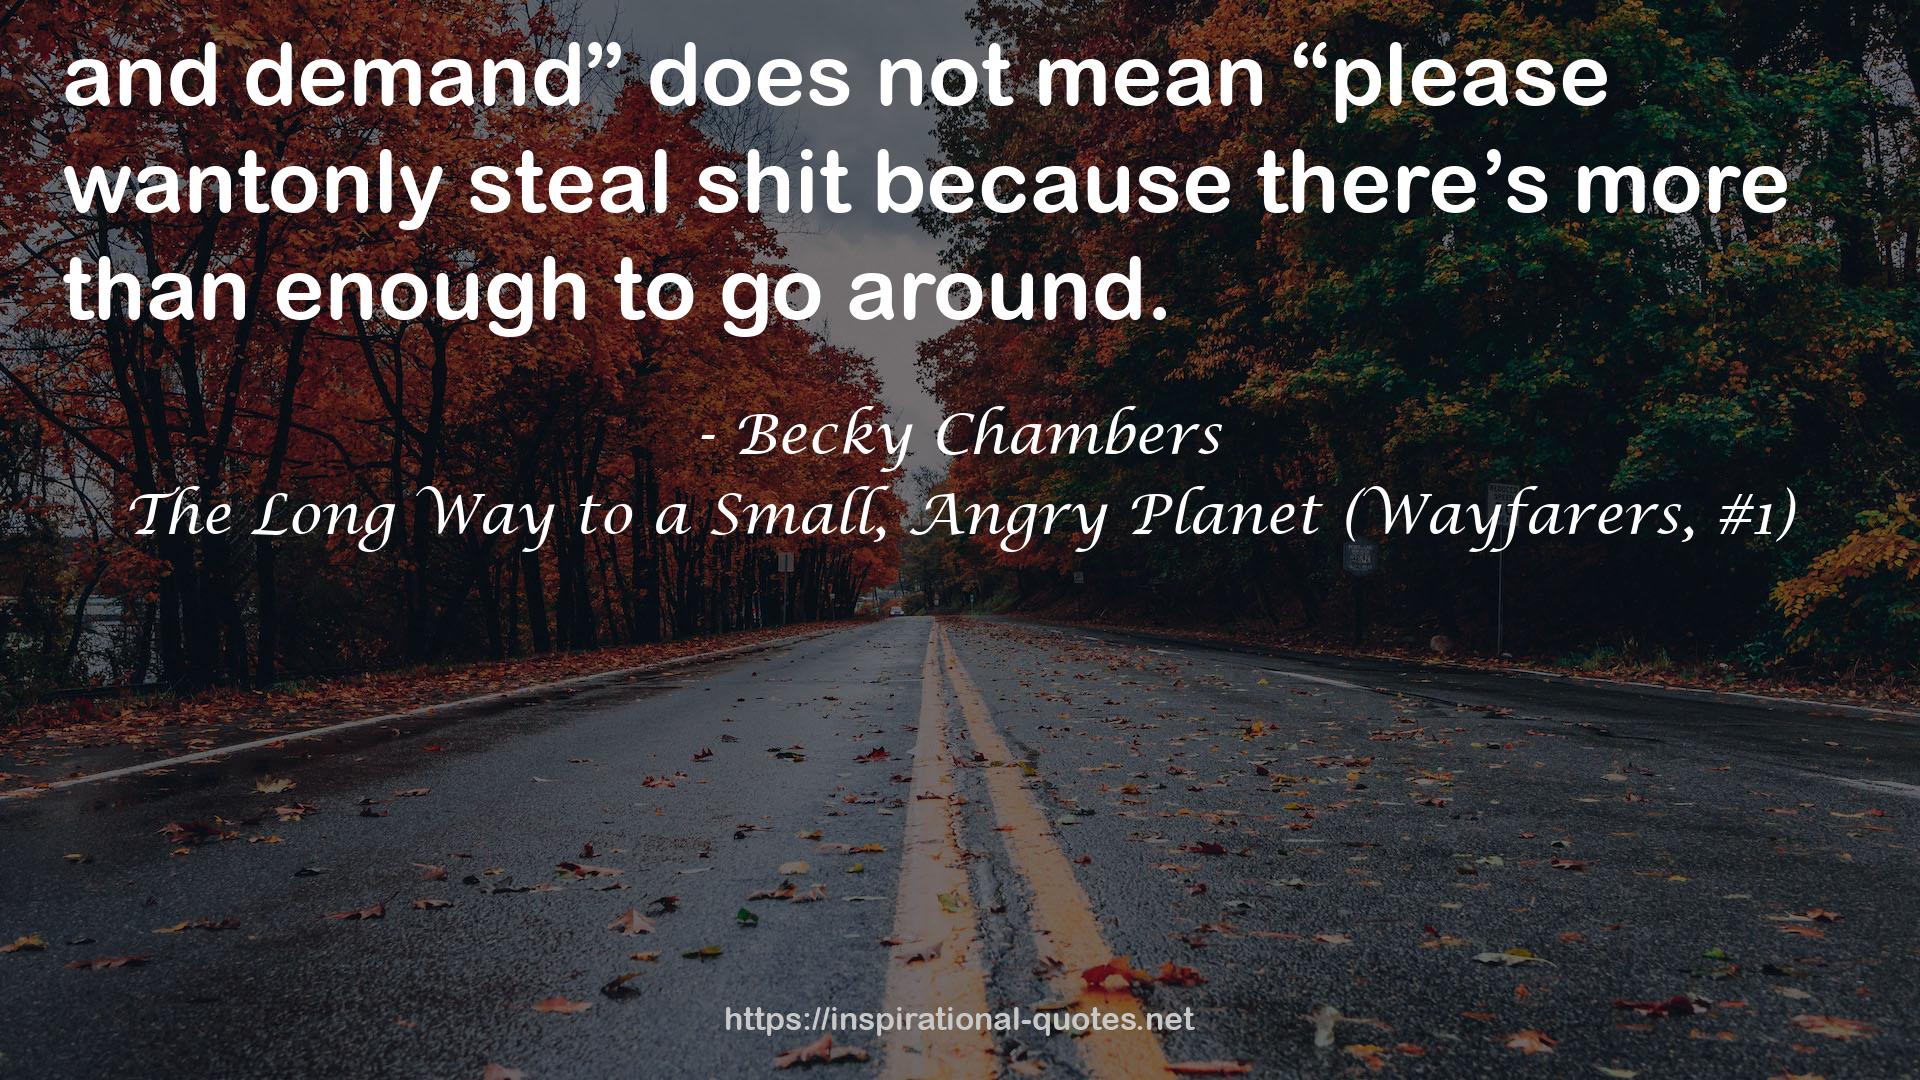 Becky Chambers QUOTES